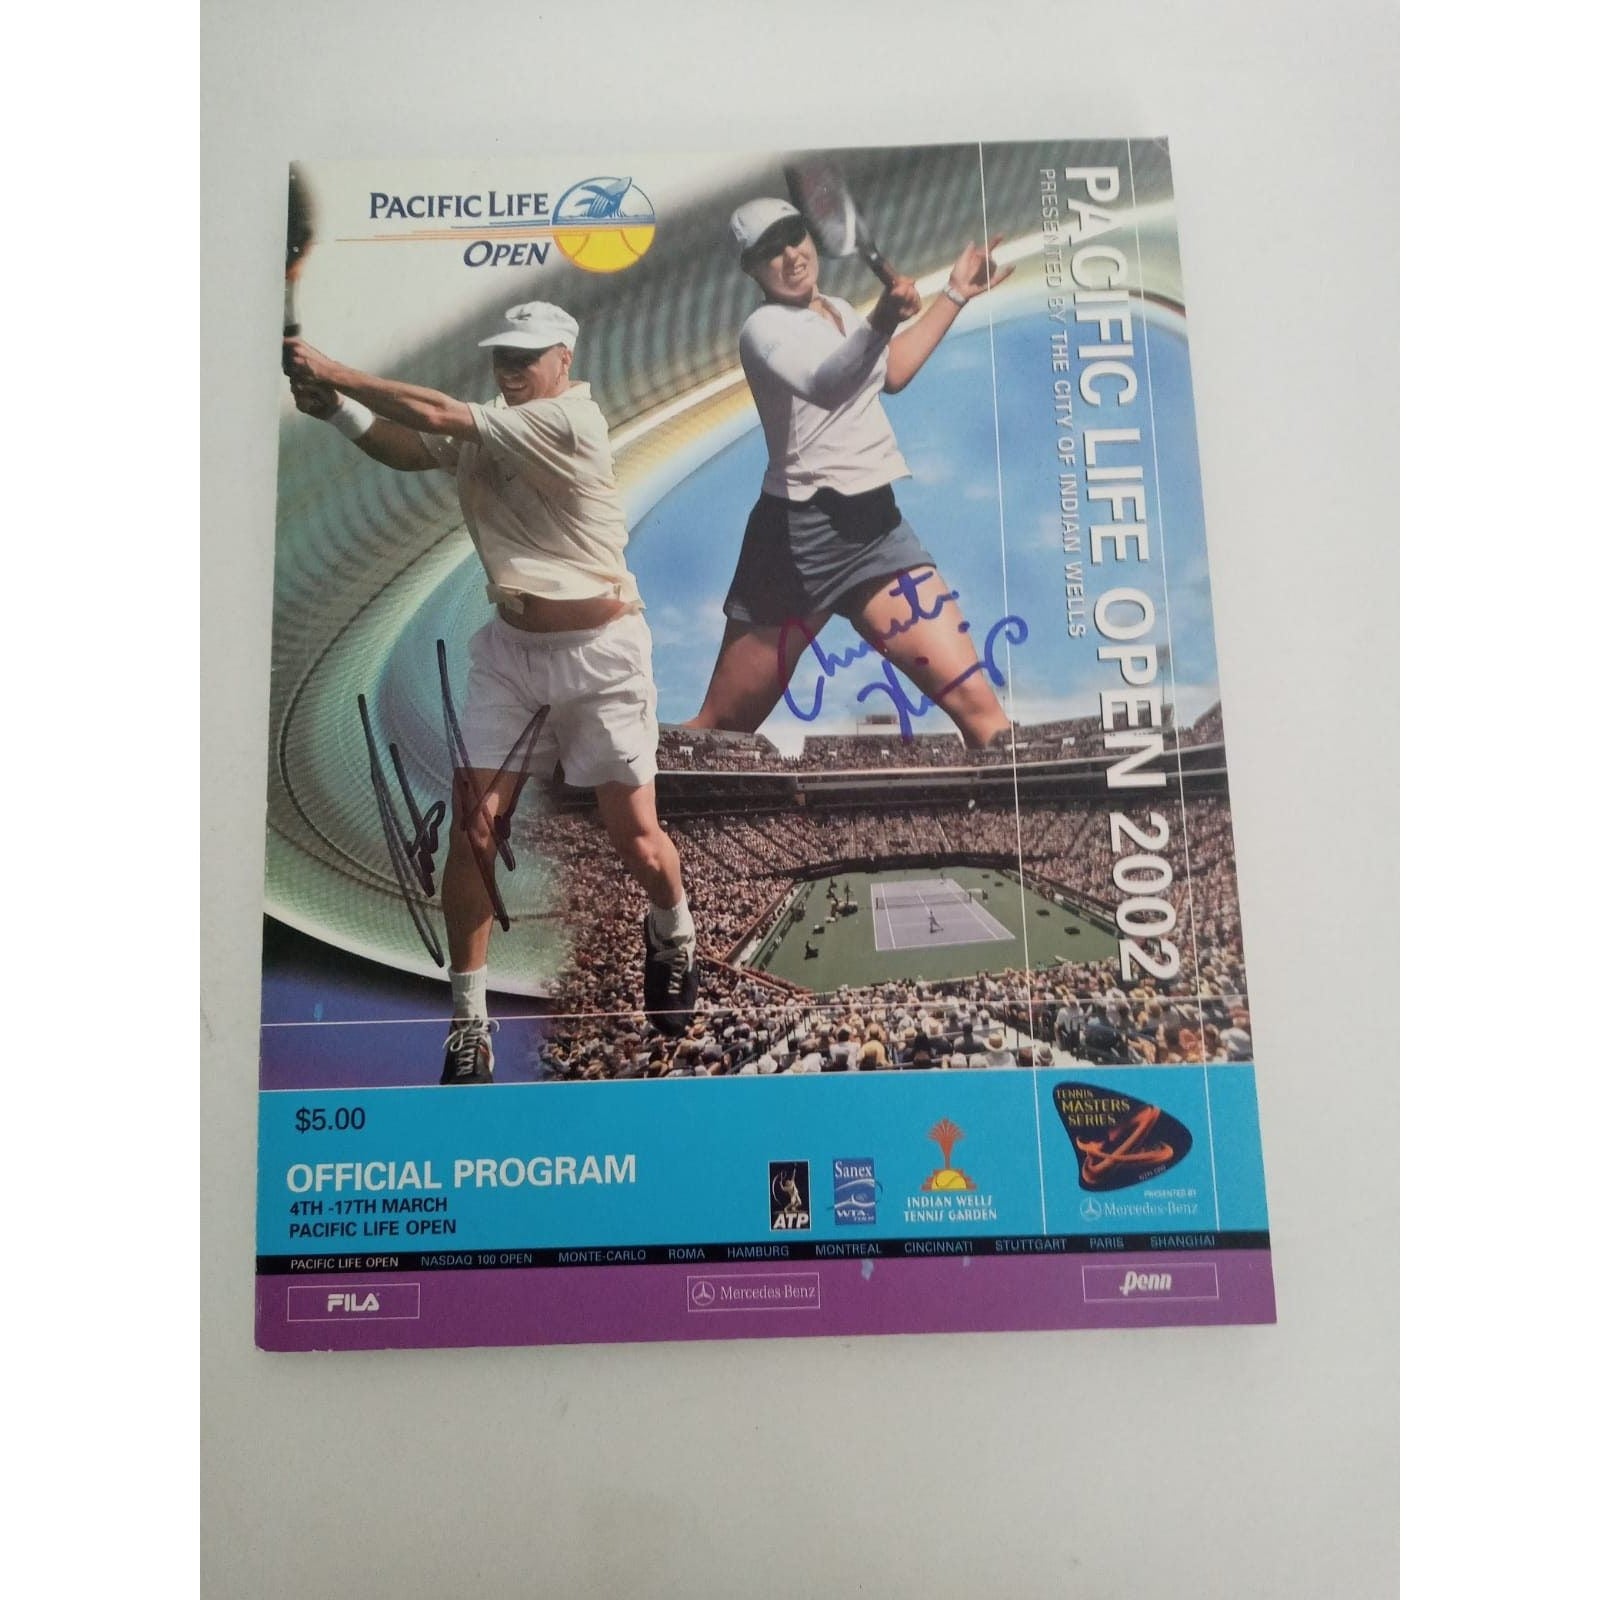 Martina Hingis and Andre Agassi signed program with proof